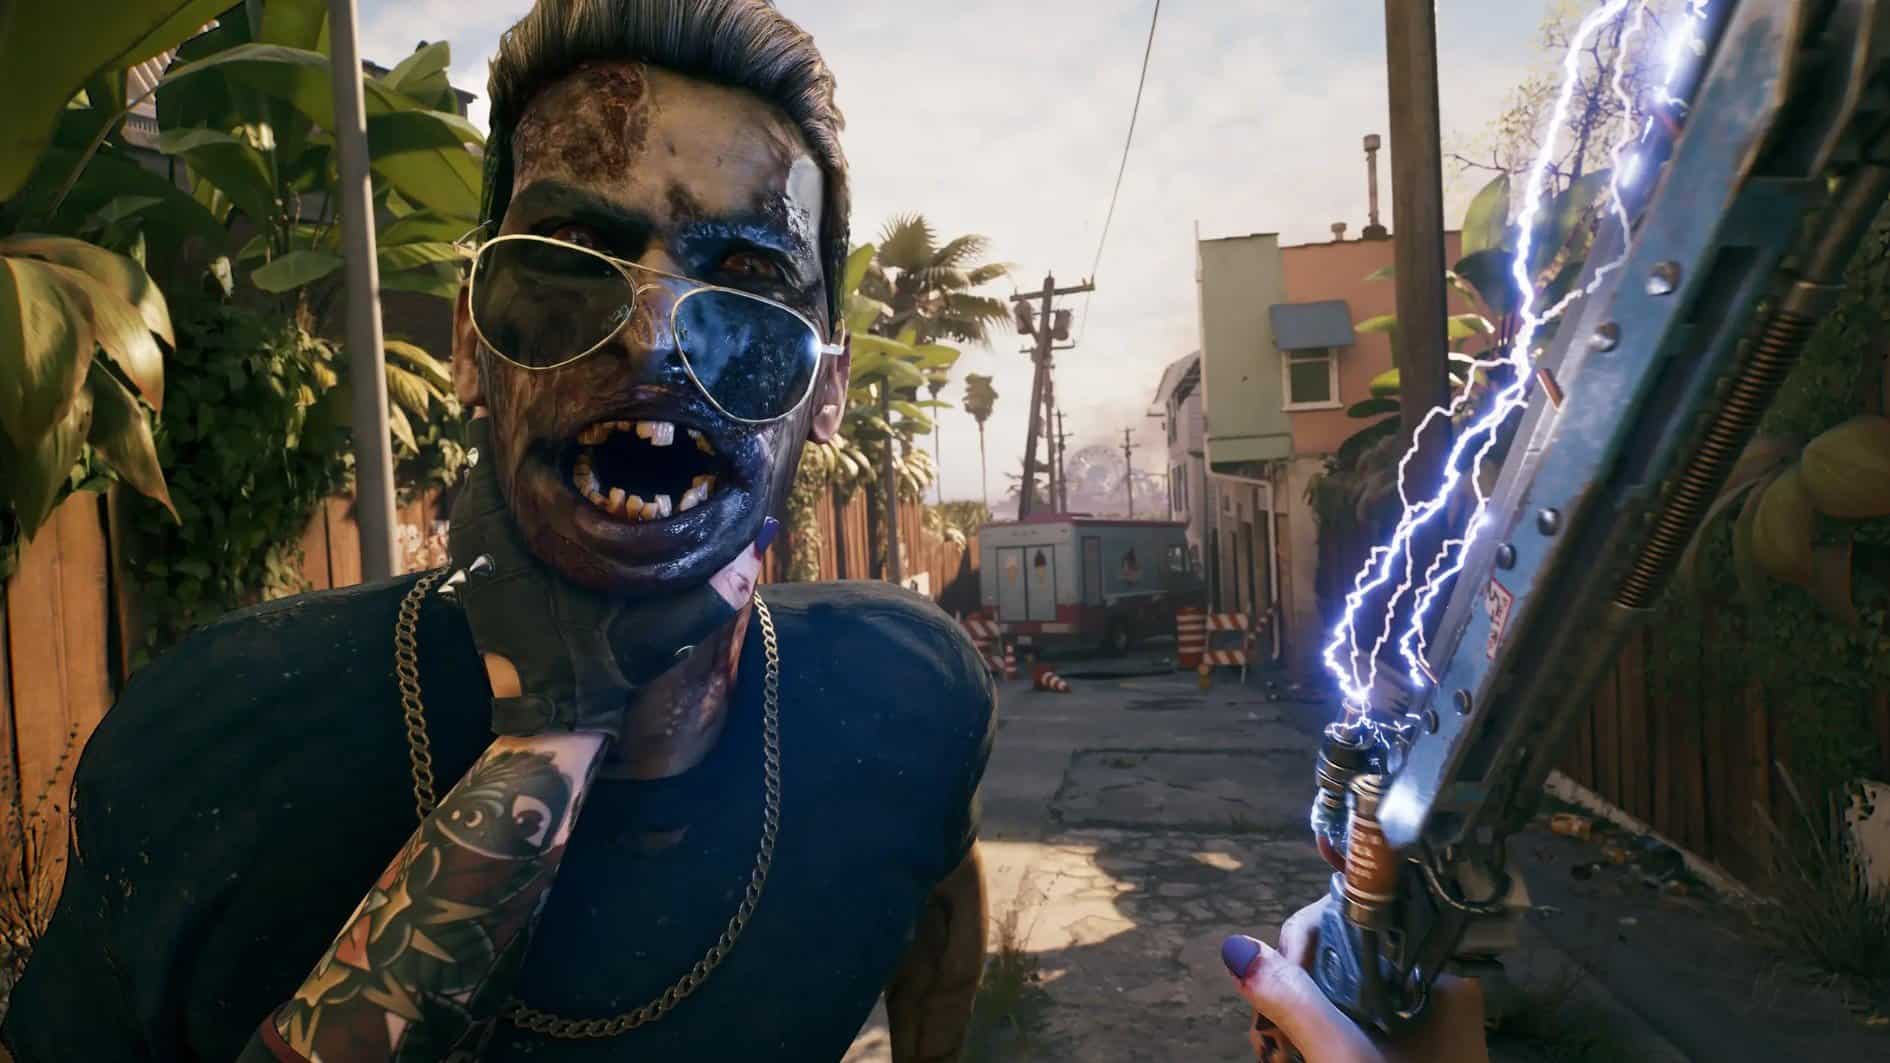 Dead Island 2 System Requirements - Can I Run It? - PCGameBenchmark